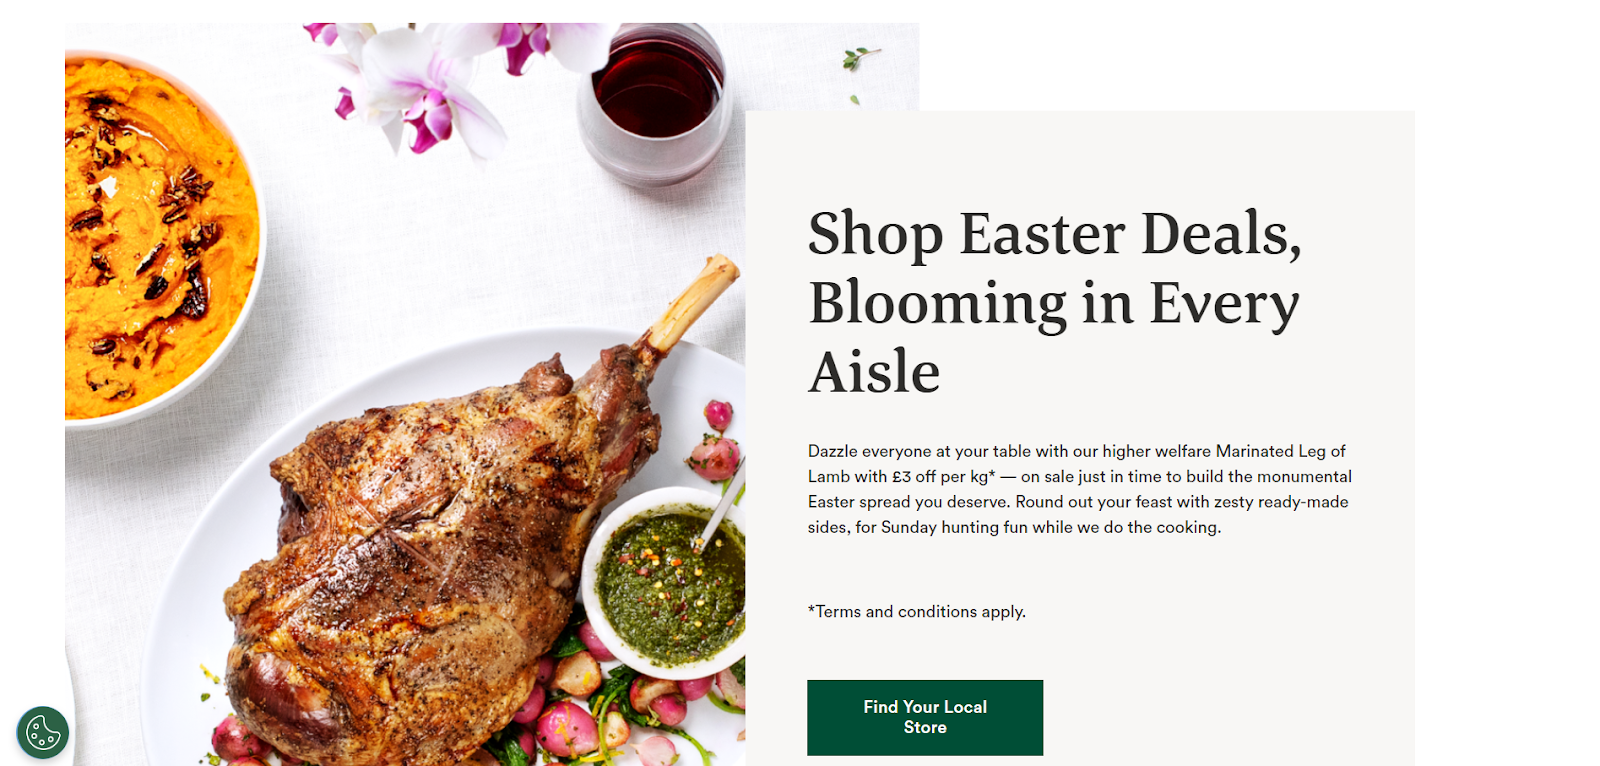 omnichannel retail examples wholefoods 3